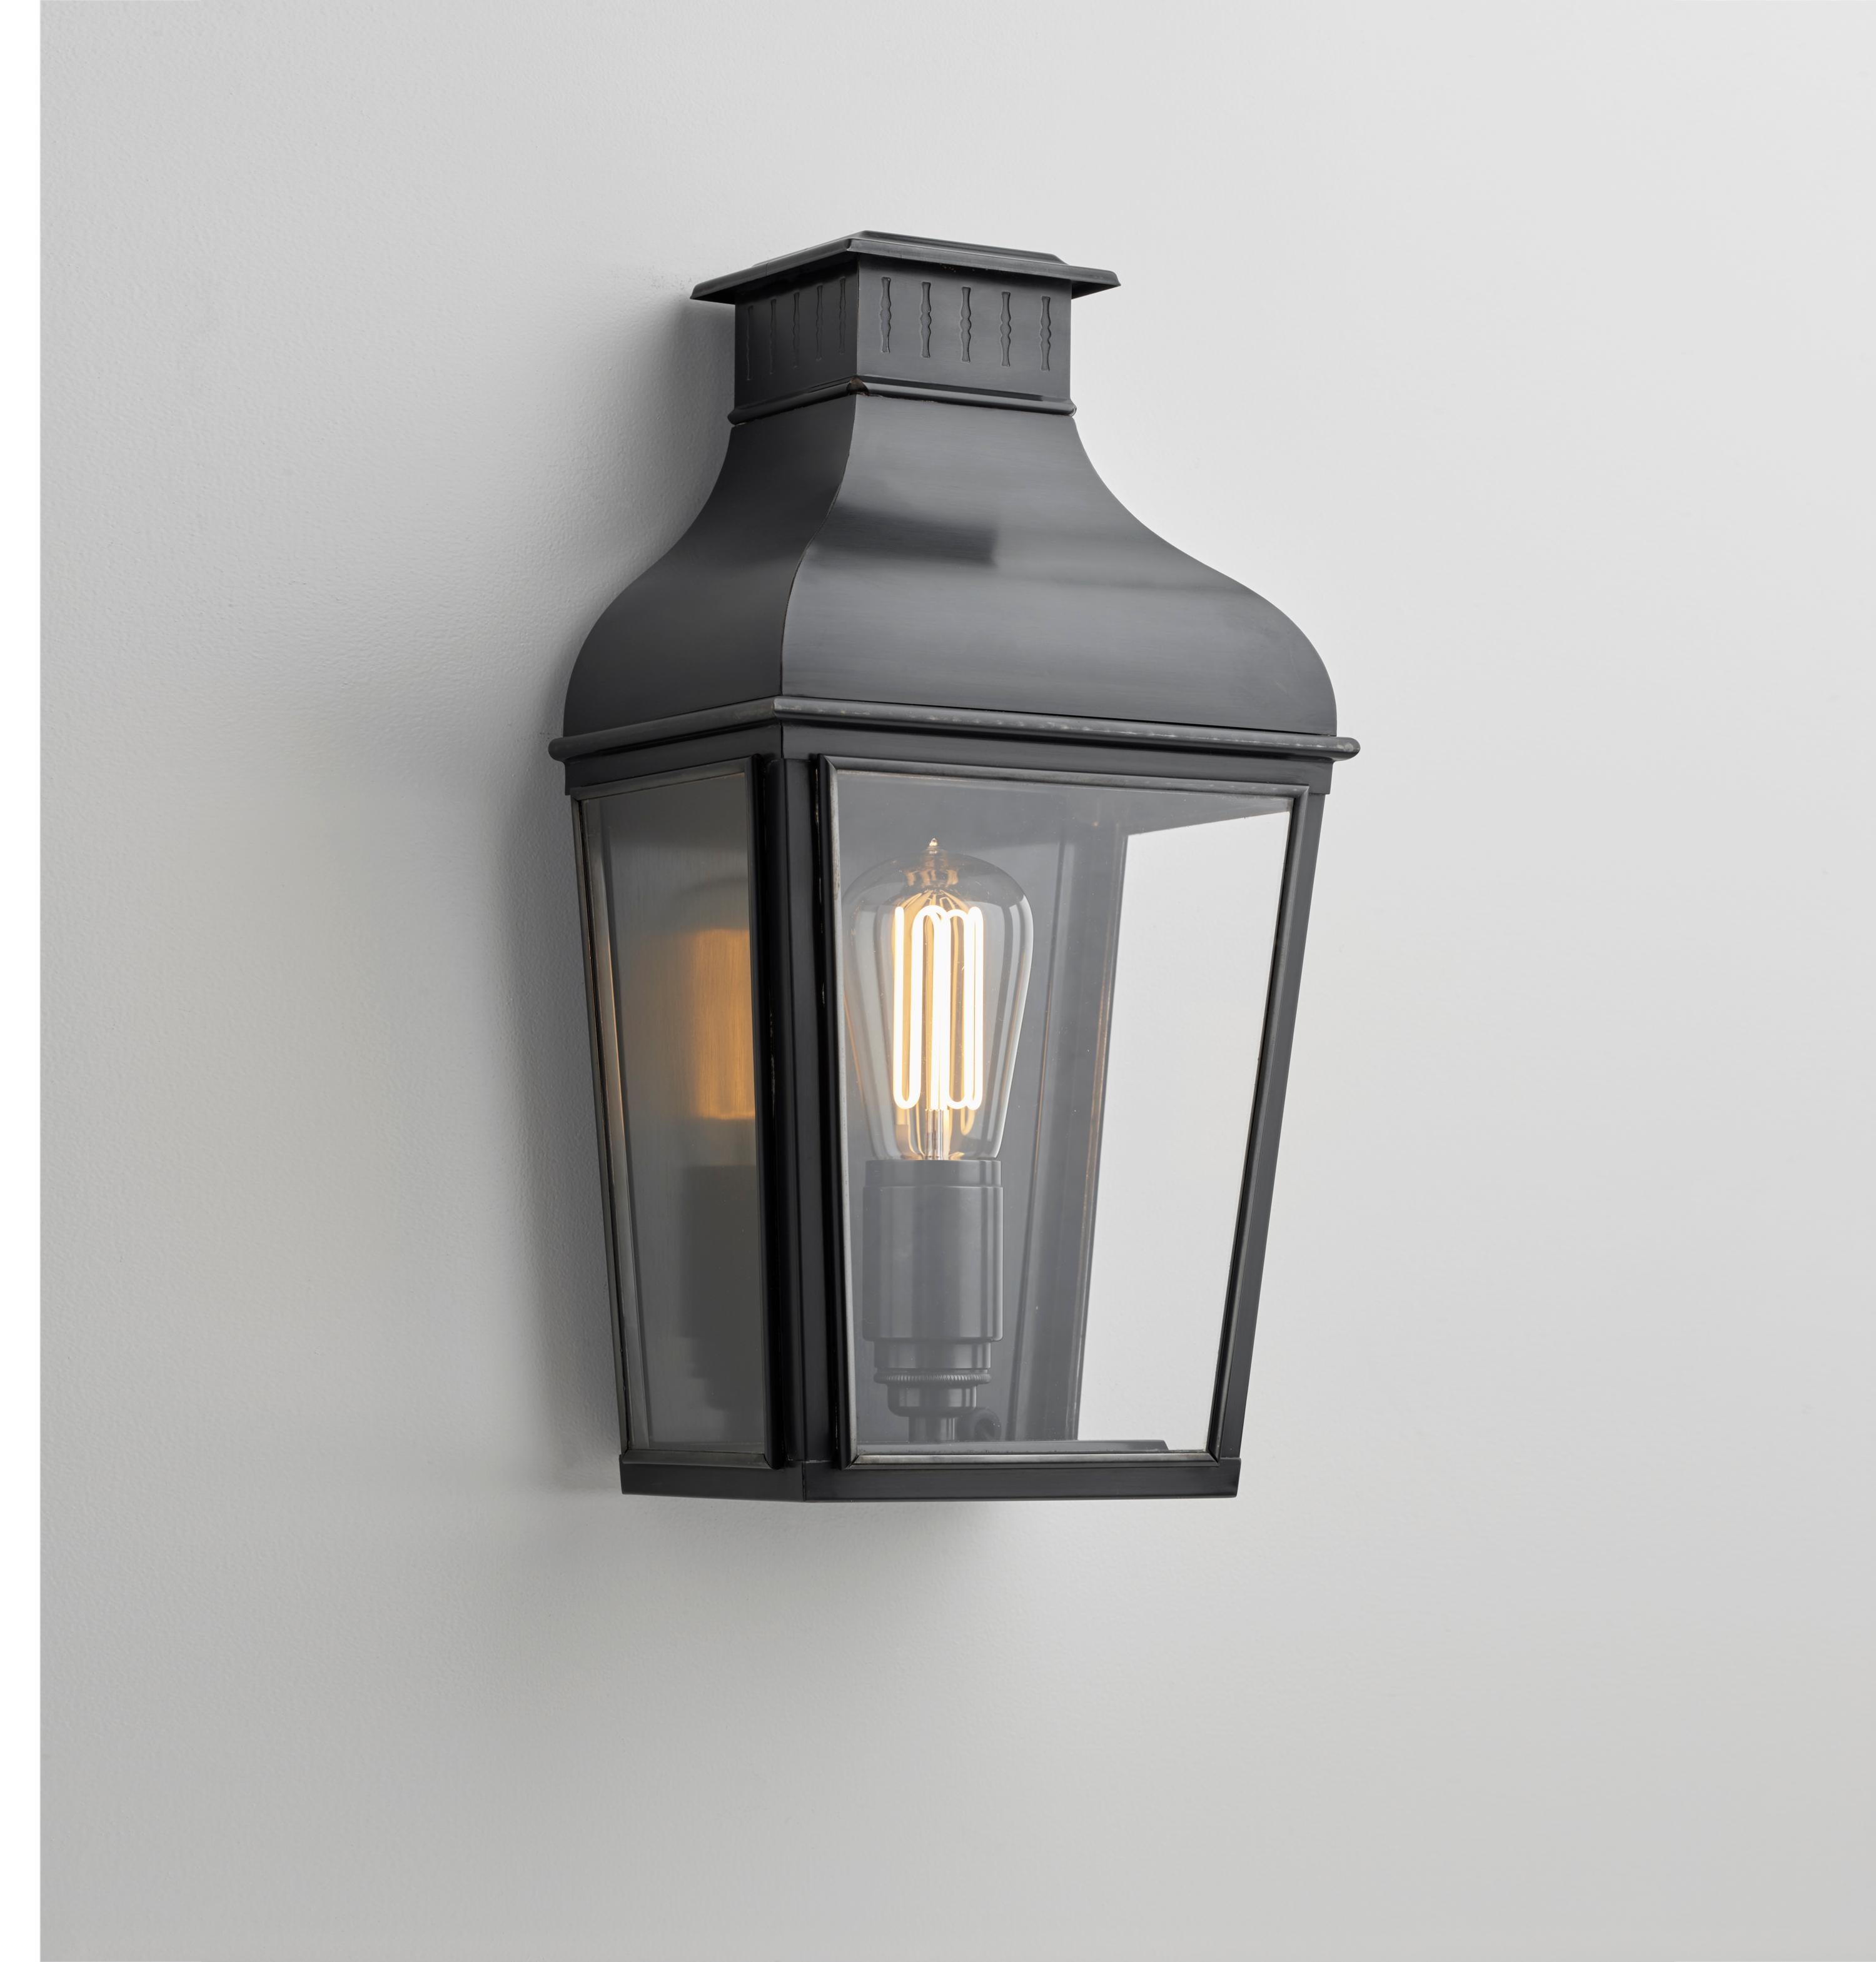 Wall light with pagoda structure in dark bronze with outside fitted clear glass and spring closure. For indoor and outdoor use (IP44).

Caret squirrel cage lamp 230V E27 7,7W 2300K. Main power 230V 50Hz.